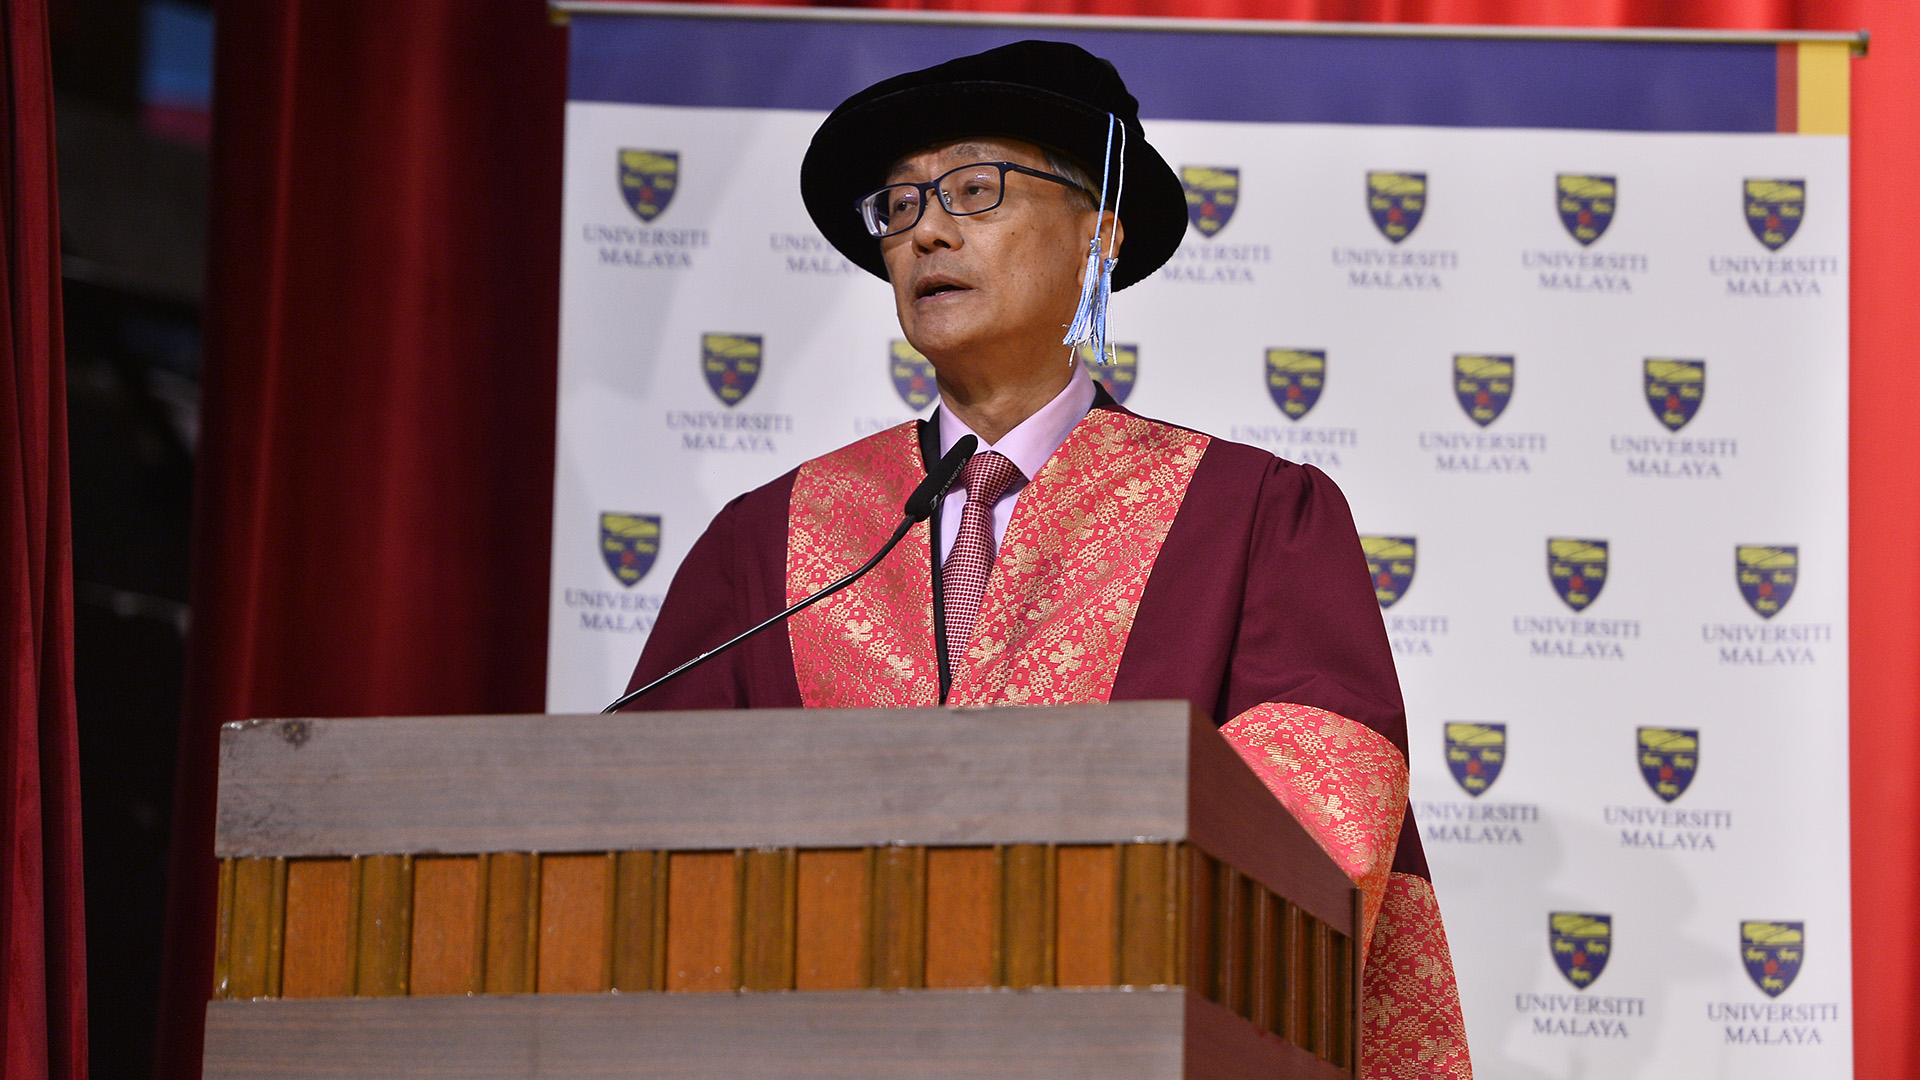 NUS President Professor Tan Eng Chye conferred Honorary Doctor of Management by Universiti Malaya